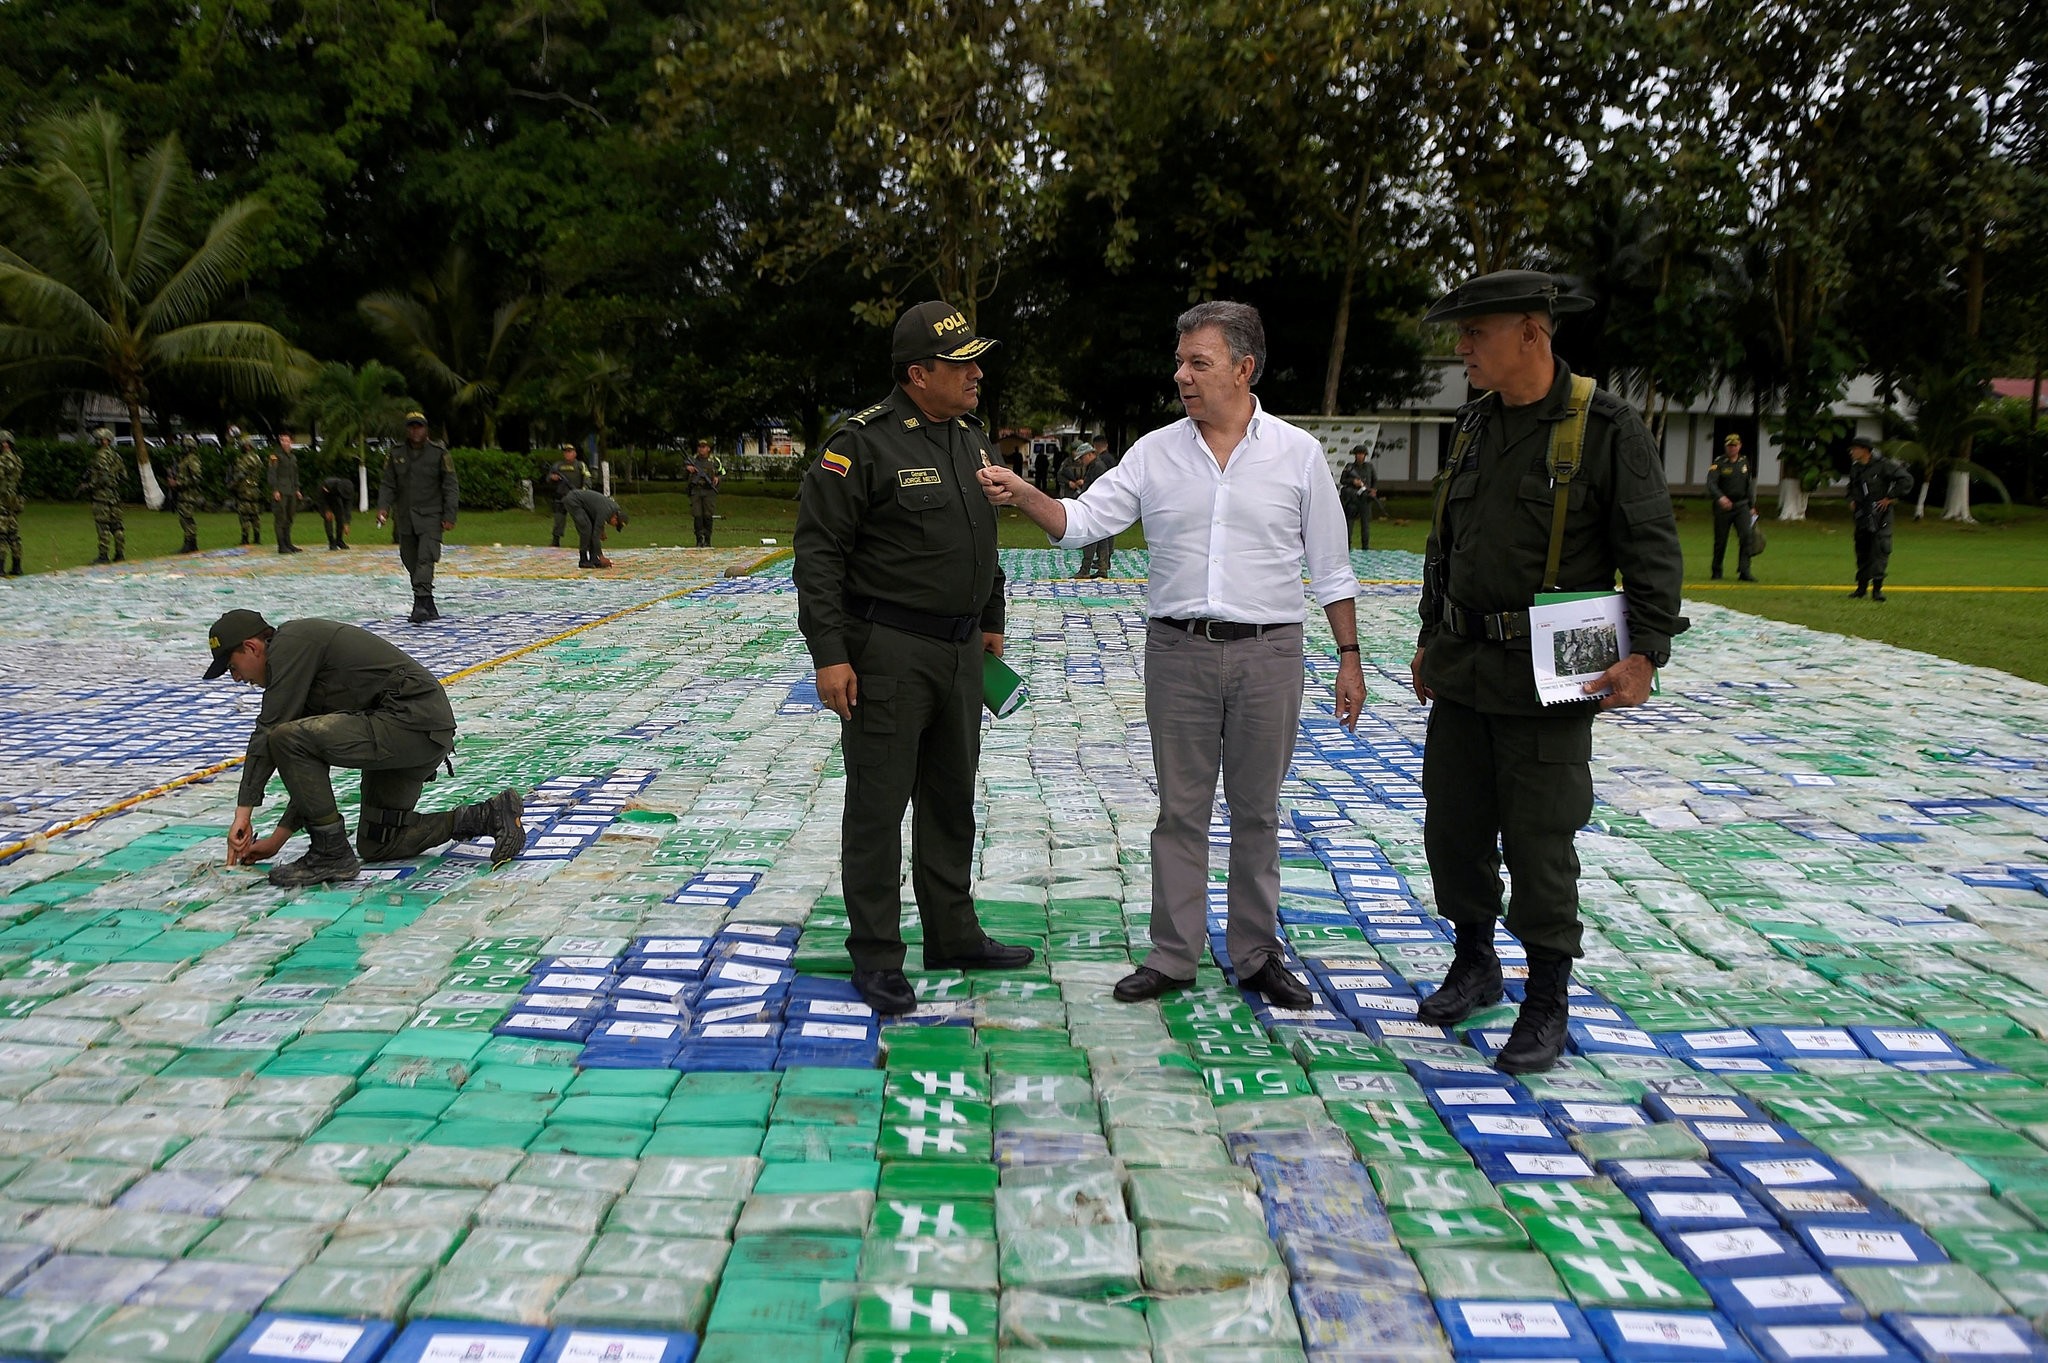 Colombia's President Juan Manuel Santos looks on after the seizure of more than 12 tons of cocaine in Apartado, Colombia November 8, 2017. (REUTERS Photo)